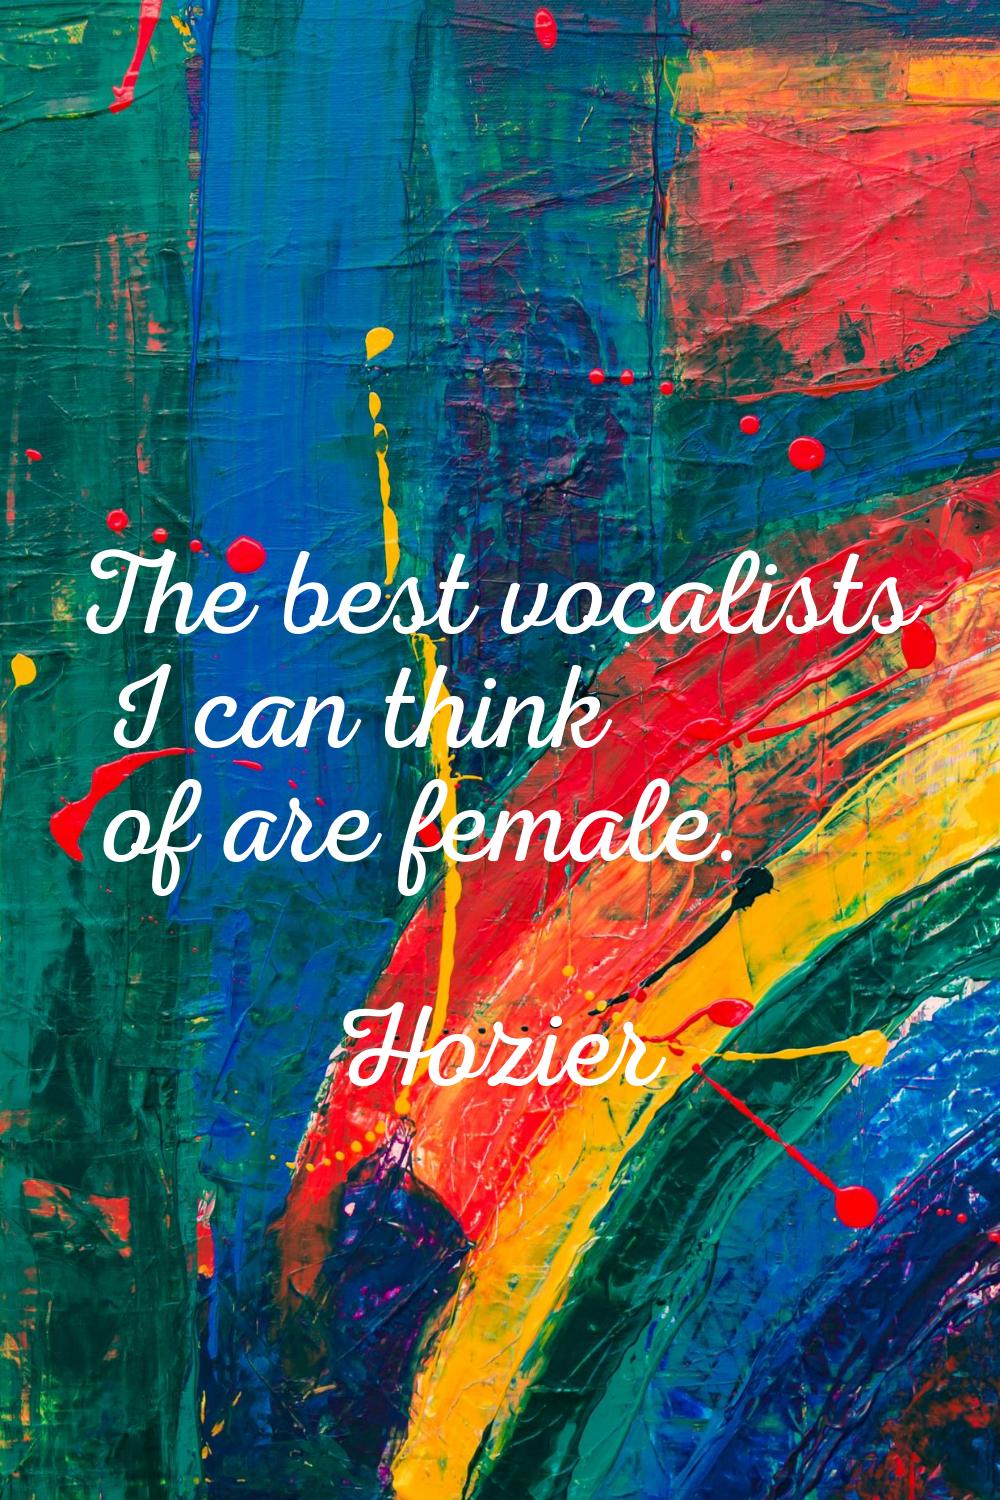 The best vocalists I can think of are female.